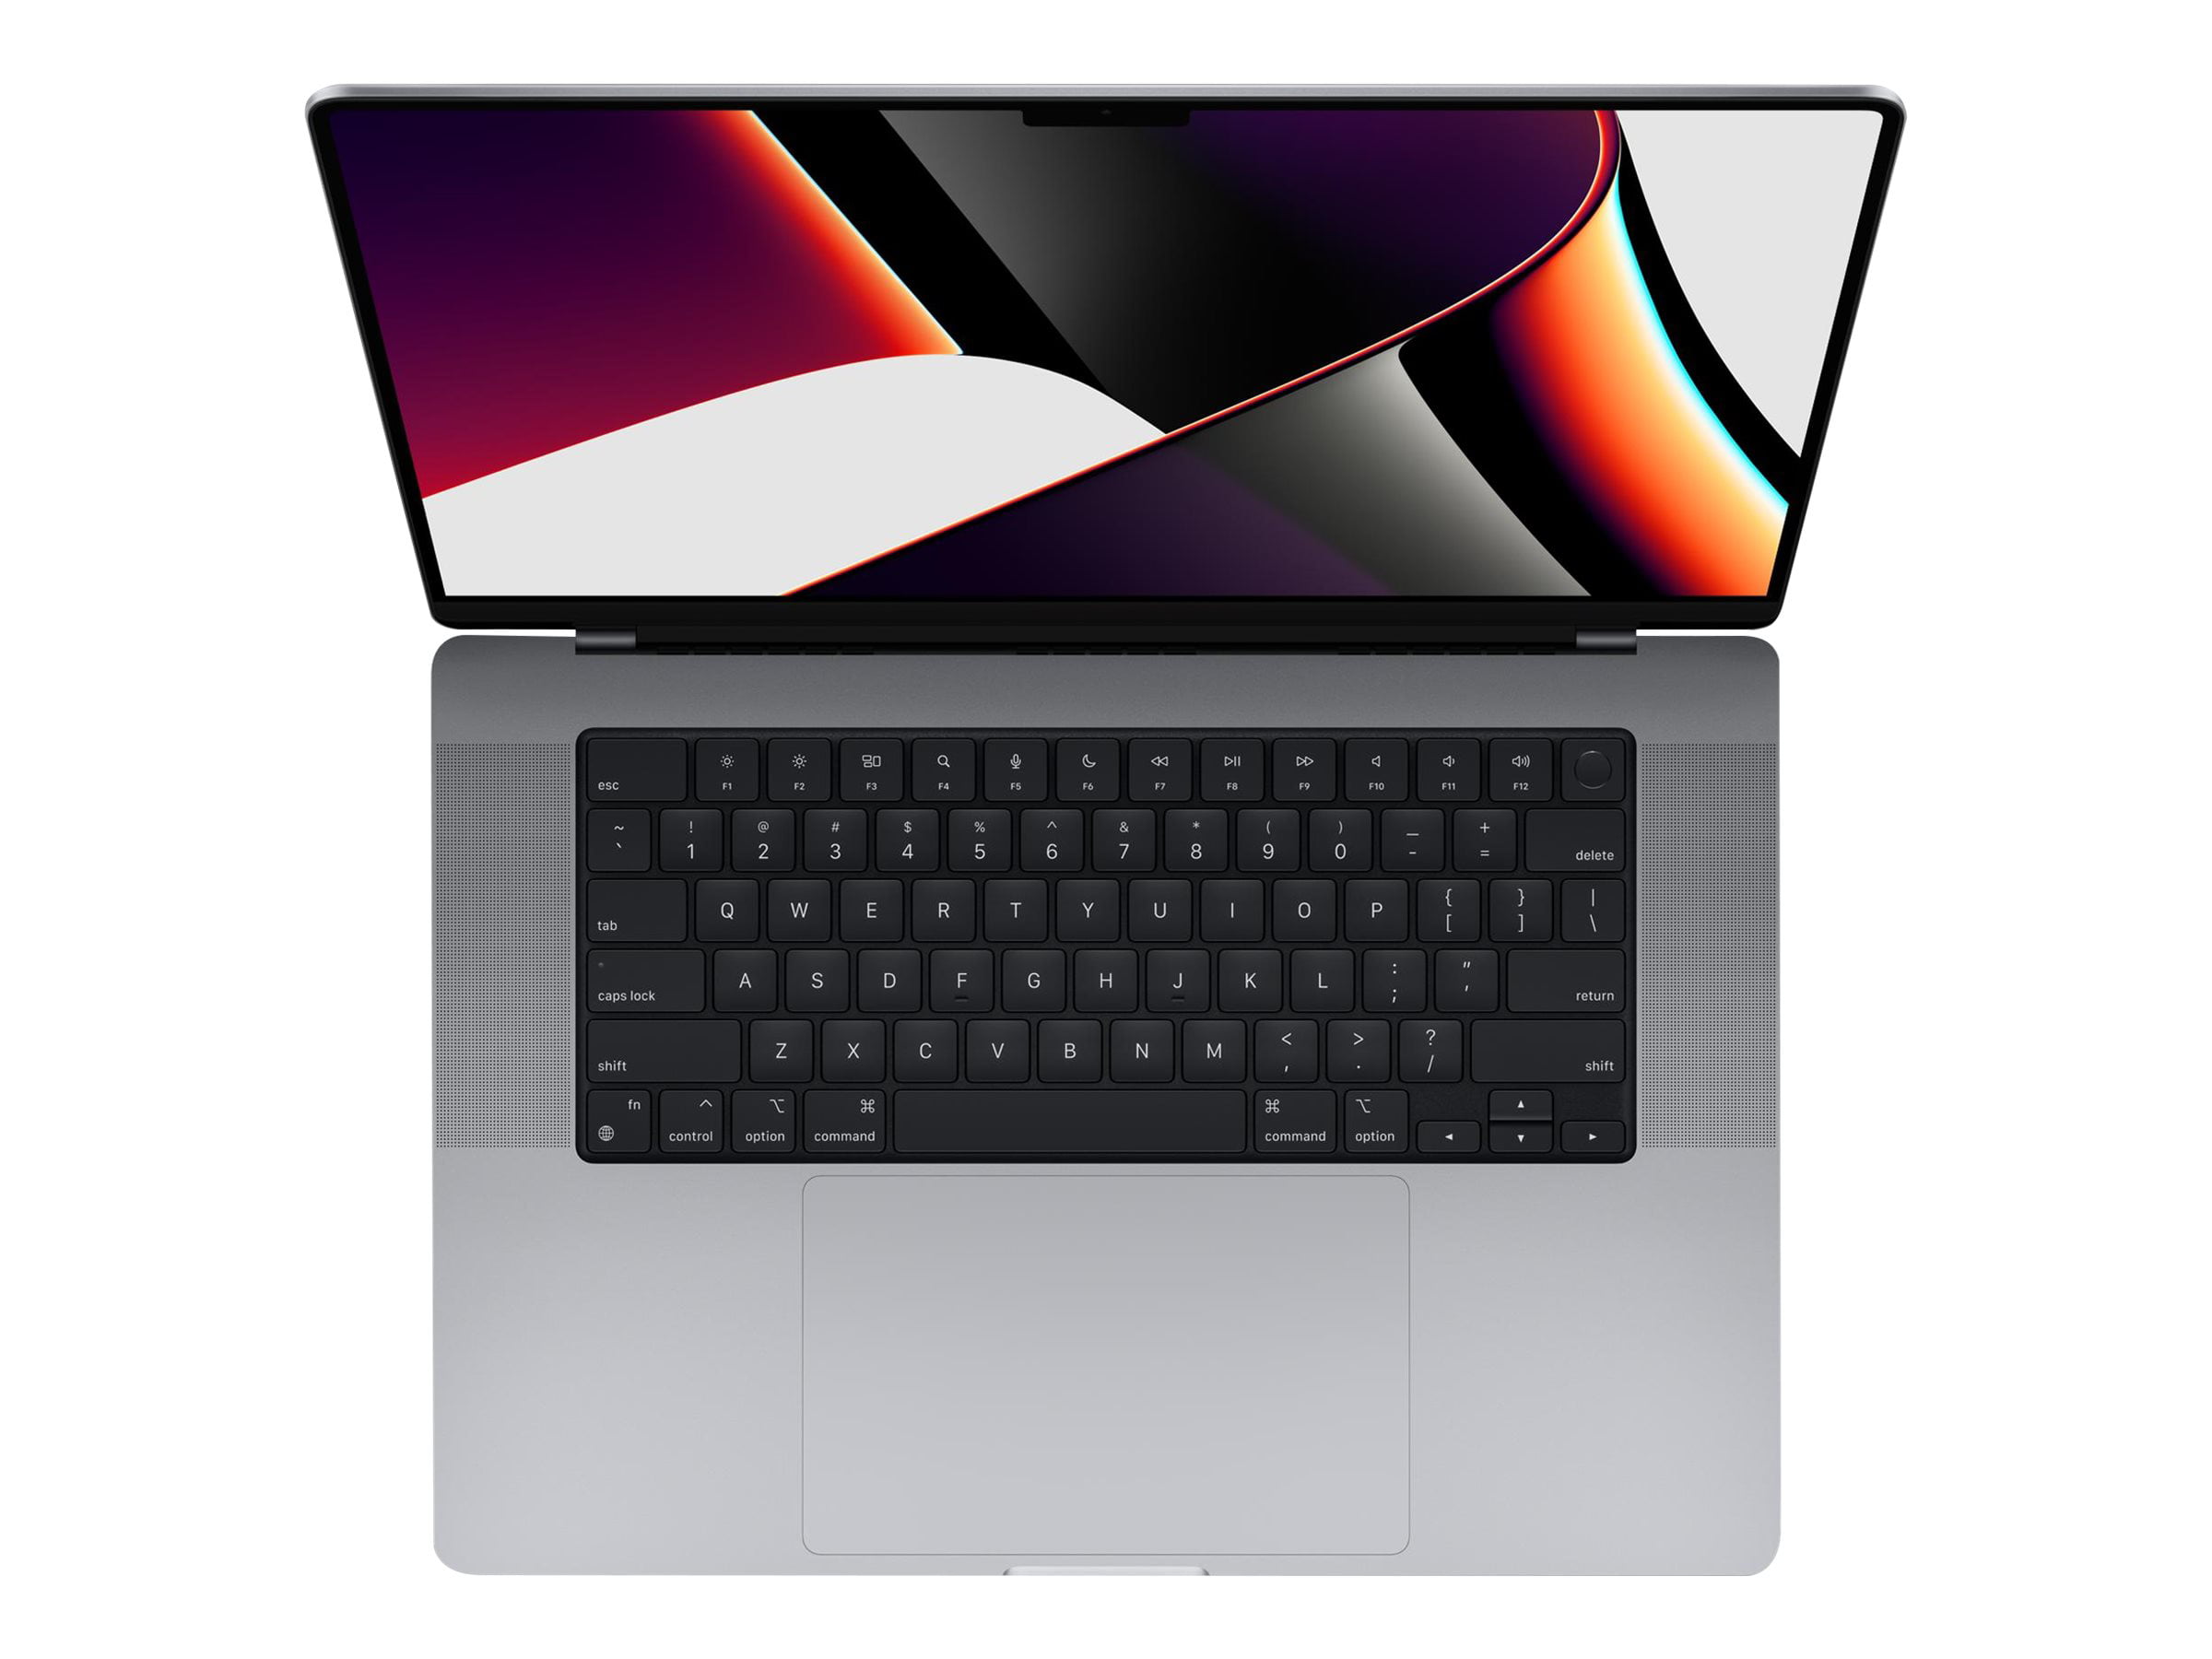 Apple MacBook Pro MK1A3LL/A (Late 2021) 16.2" Laptop Computer - Space Gray; Apple M1 Max 10-Core CPU; 32GB Unified - Micro Center - $2599.99